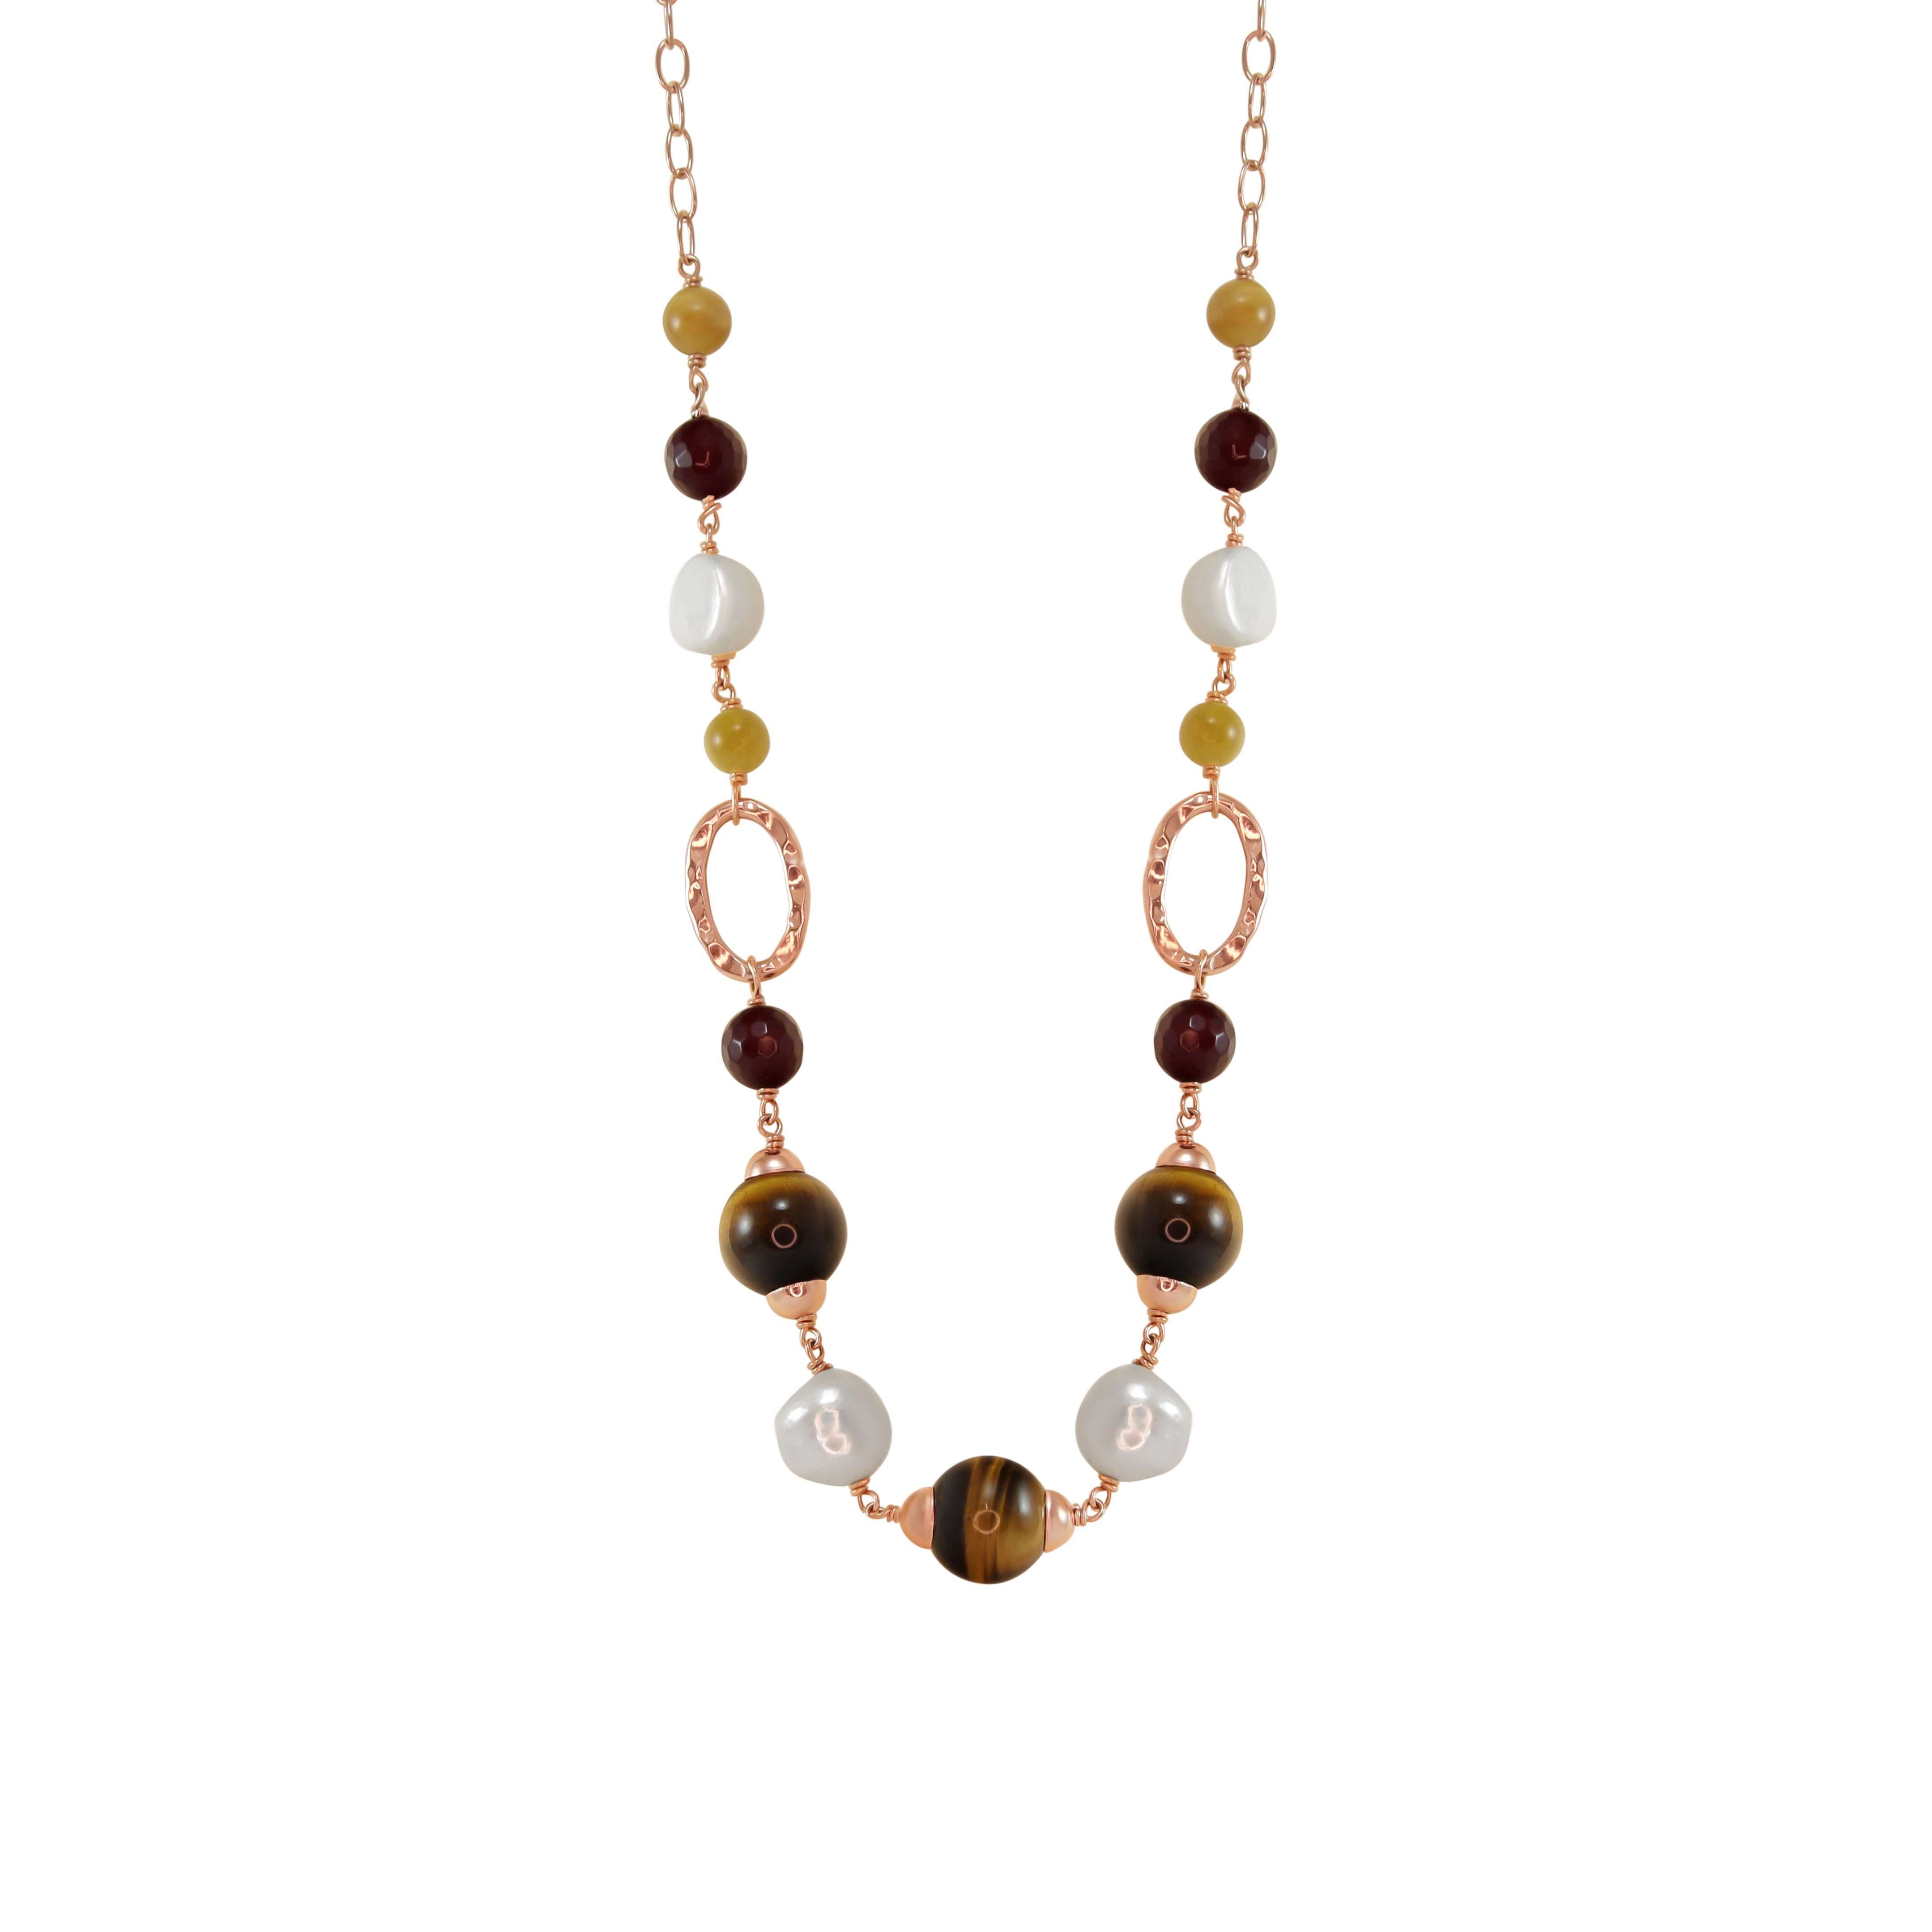 Pearl & Botswana Agate Necklace - 52cm